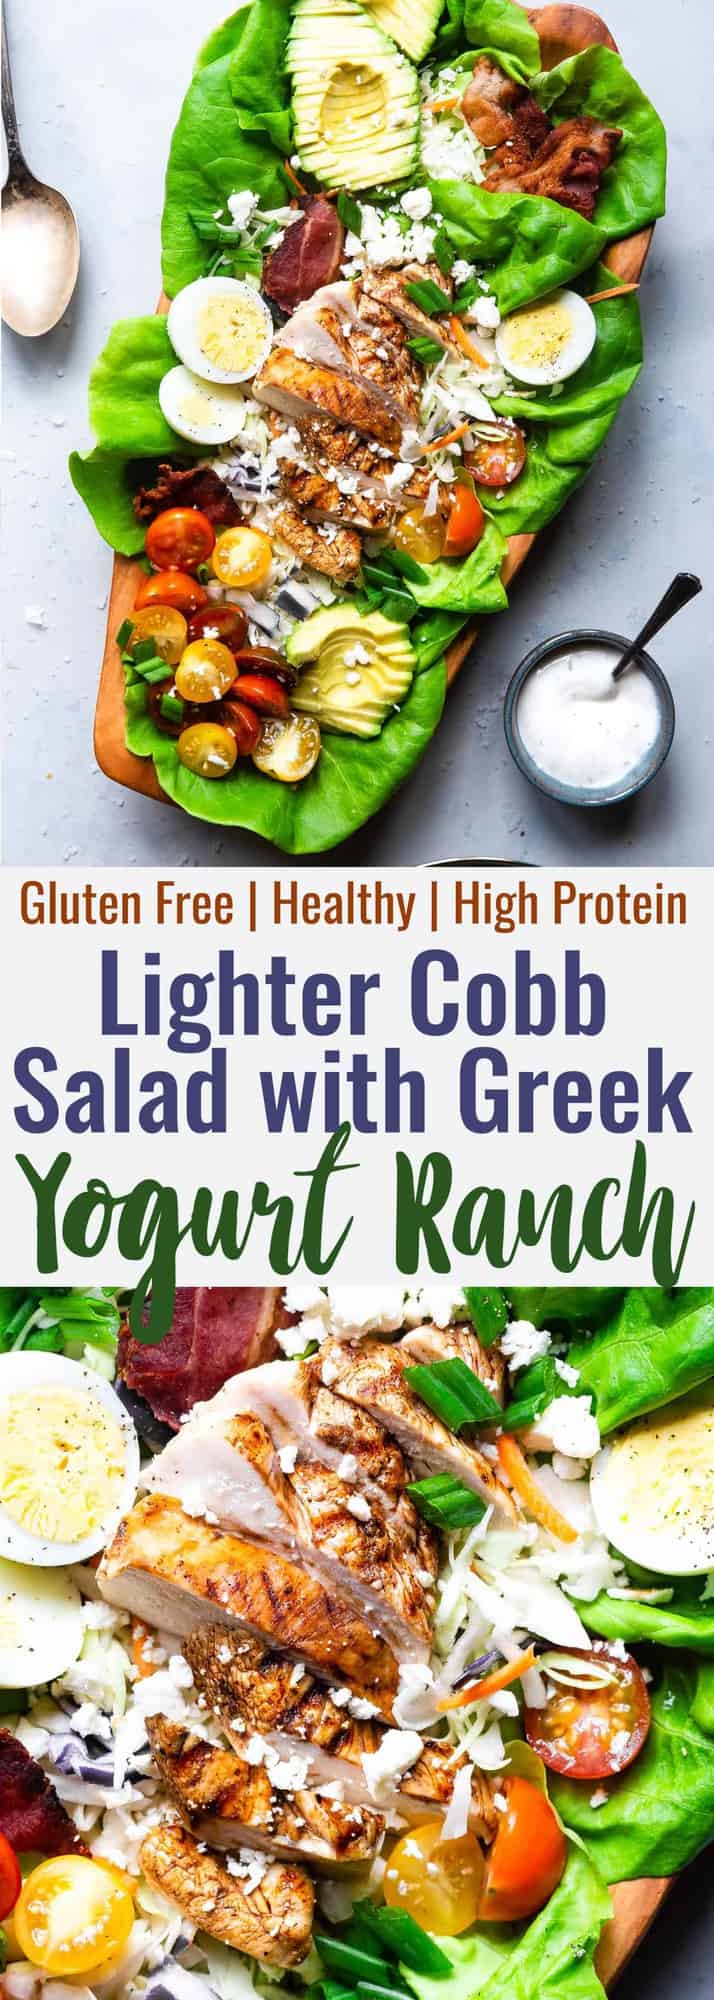 Healthy Chicken Cobb Salad Recipe - This quick, easy skinny Chicken Cobb Salad Recipe is a lighter remake that cuts over half the calories of the classic but not the taste! No one will know it's lighter, gluten free and lower carb! | #Foodfaithfitness | #Glutenfree #lowcarb #healthy #salad #grainfree